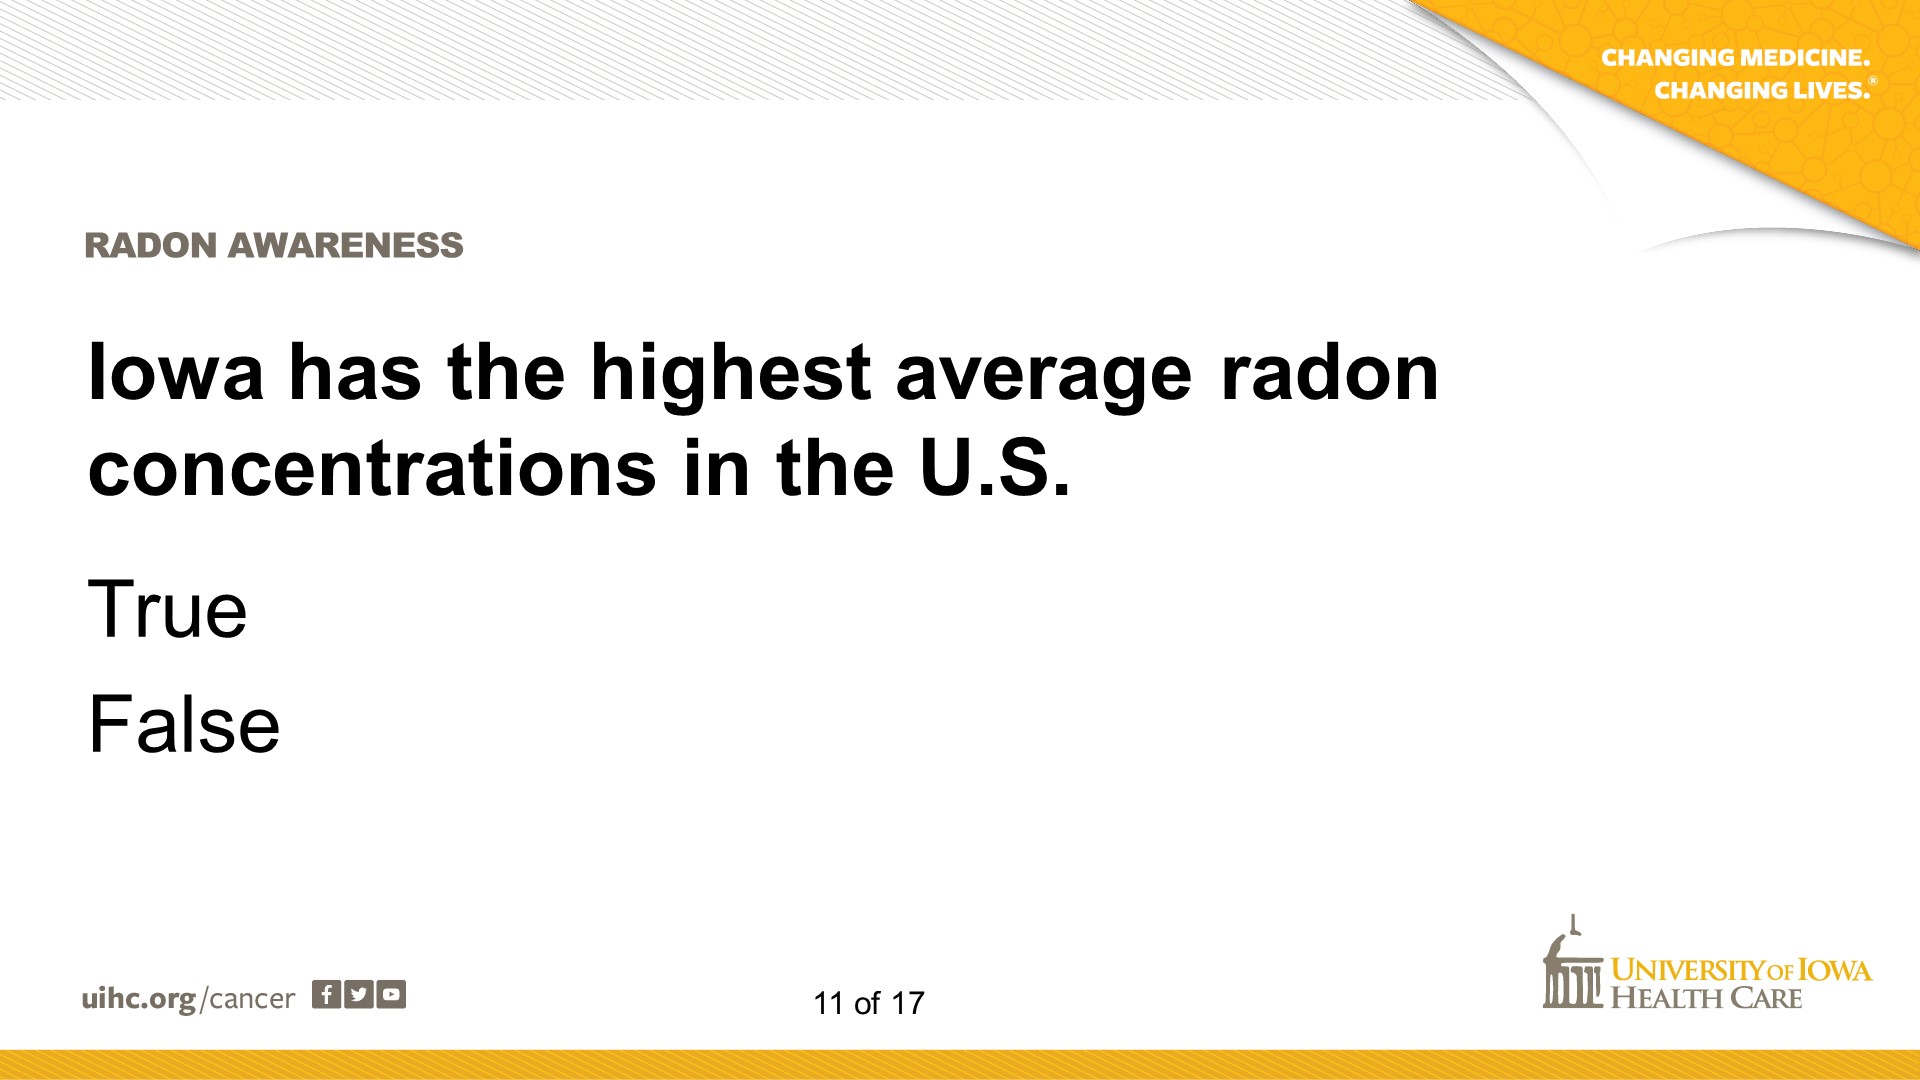 True or false? Iowa has the highest average radon concentrations in the U.S.